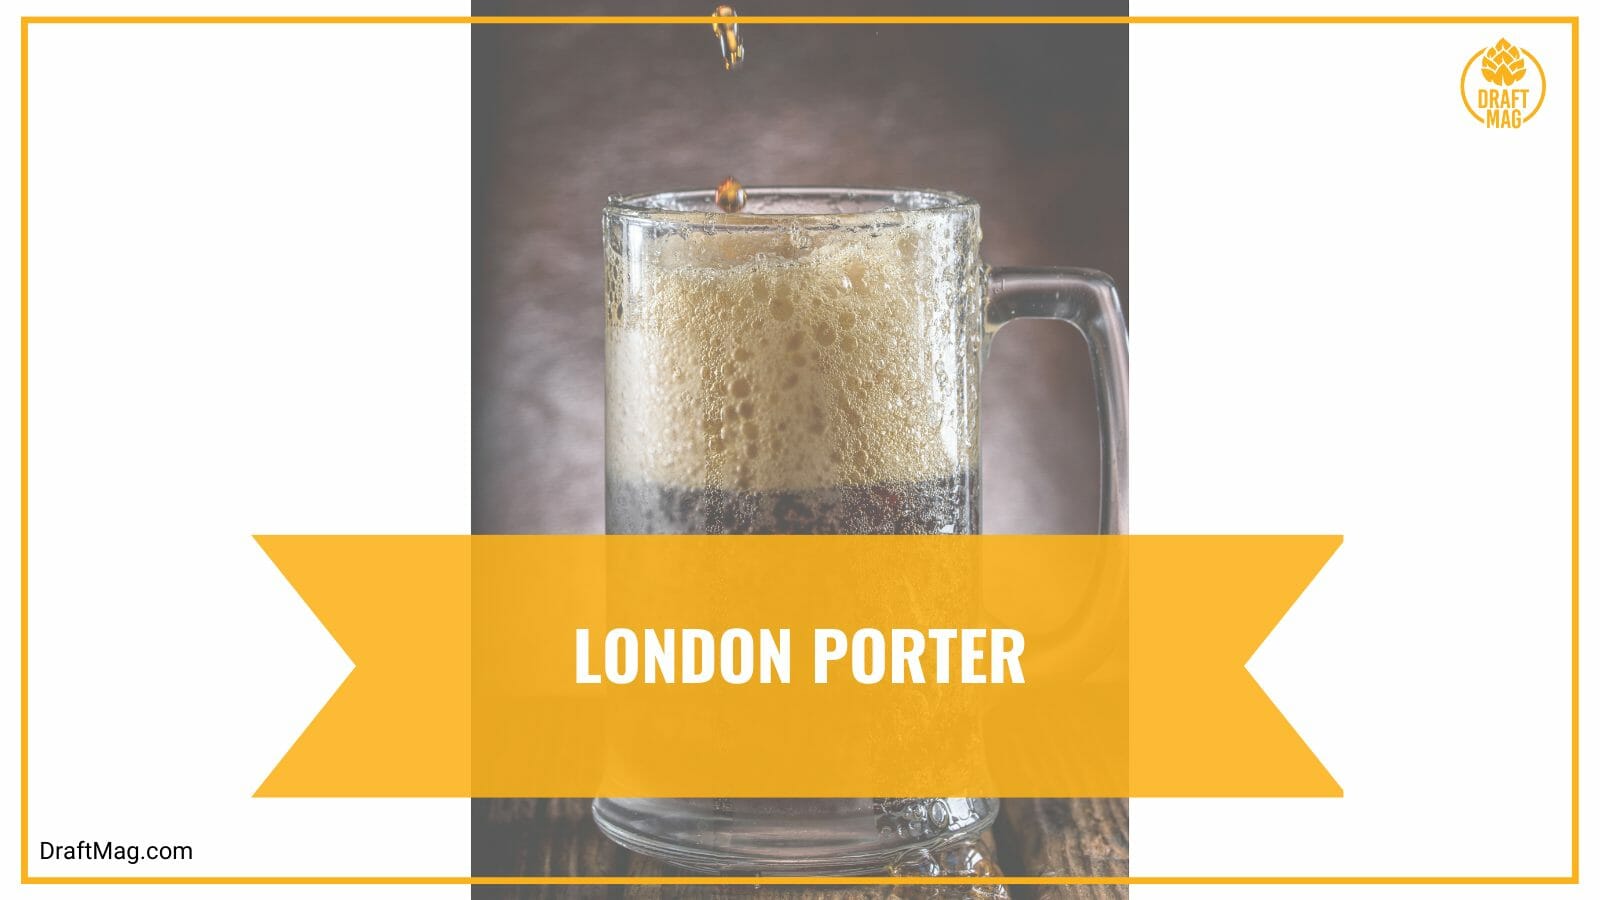 London porter with coffee flavor